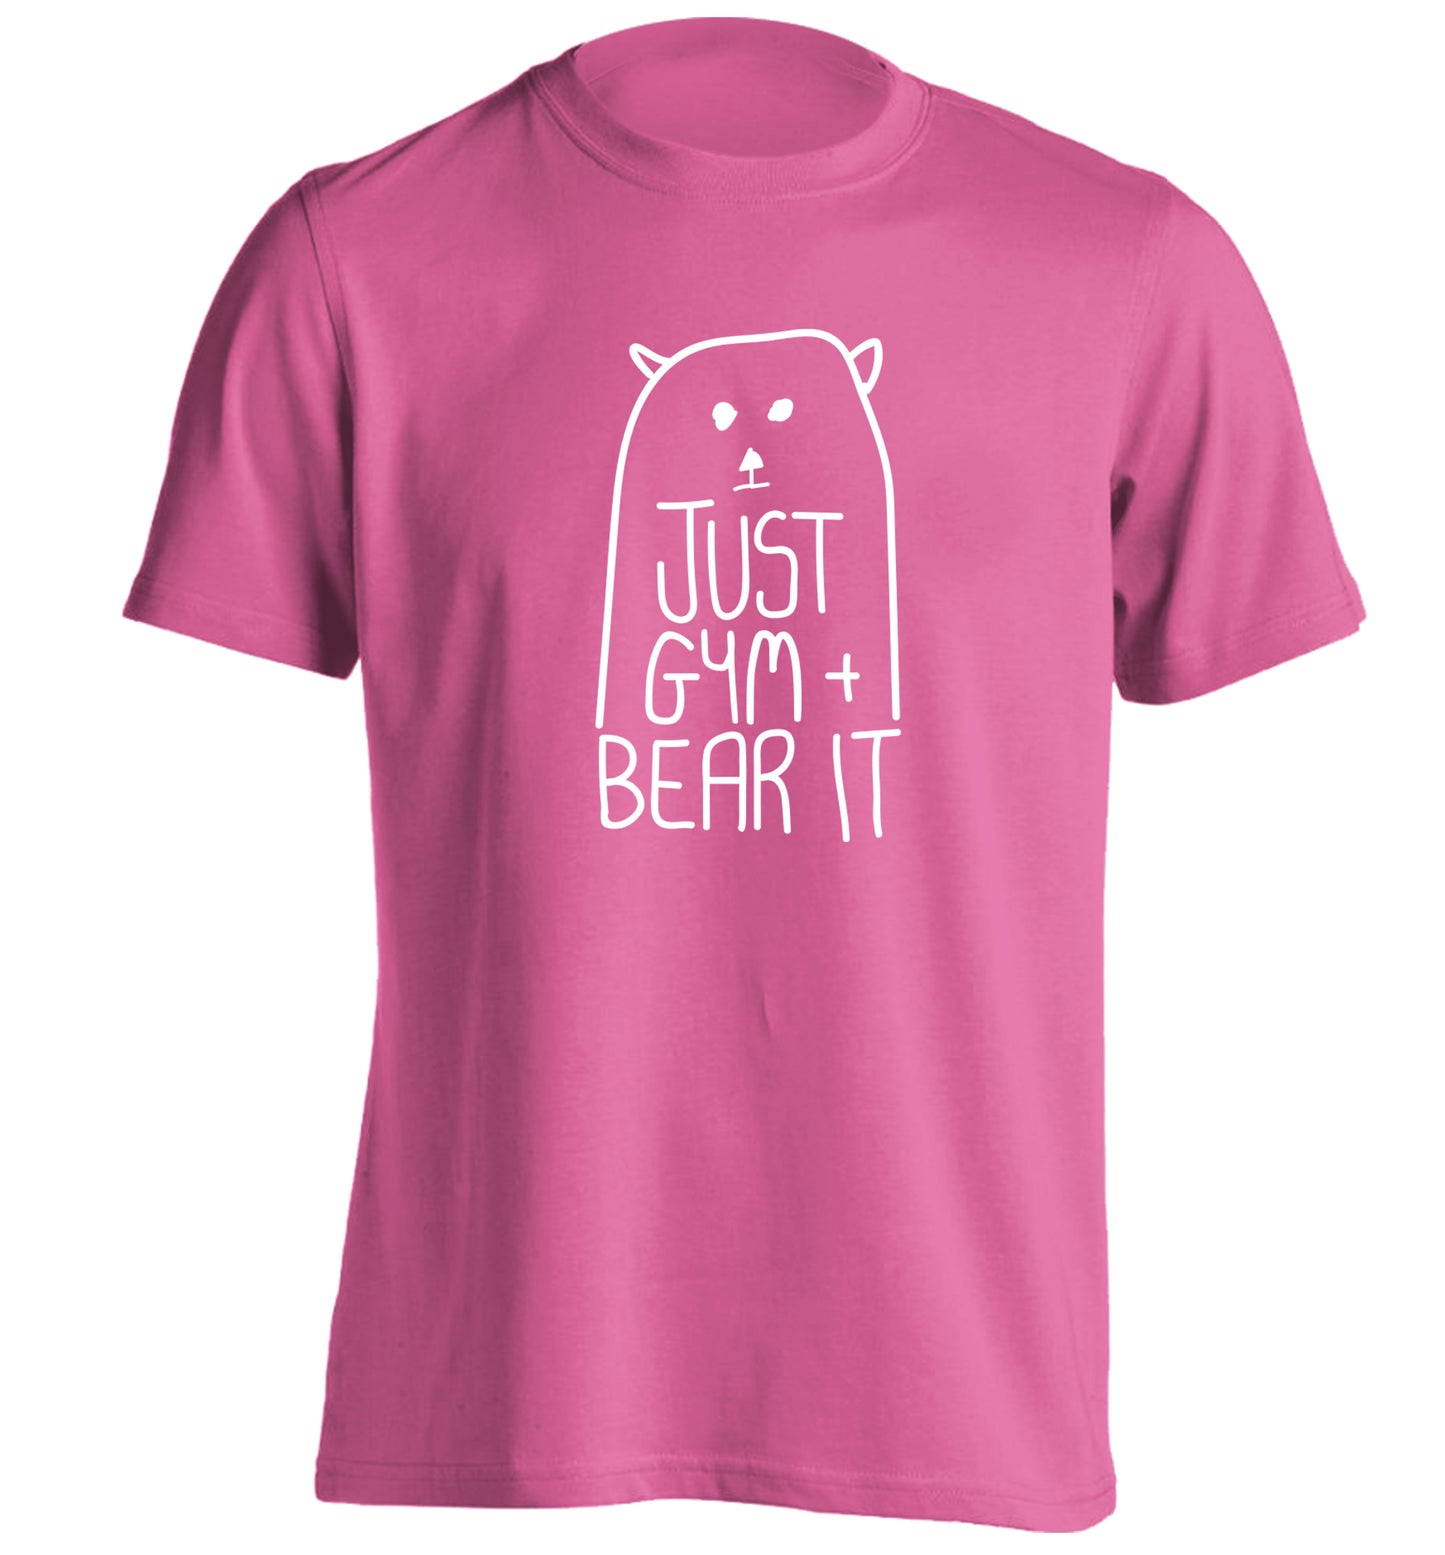 Just gym and bear it adults unisex pink Tshirt 2XL